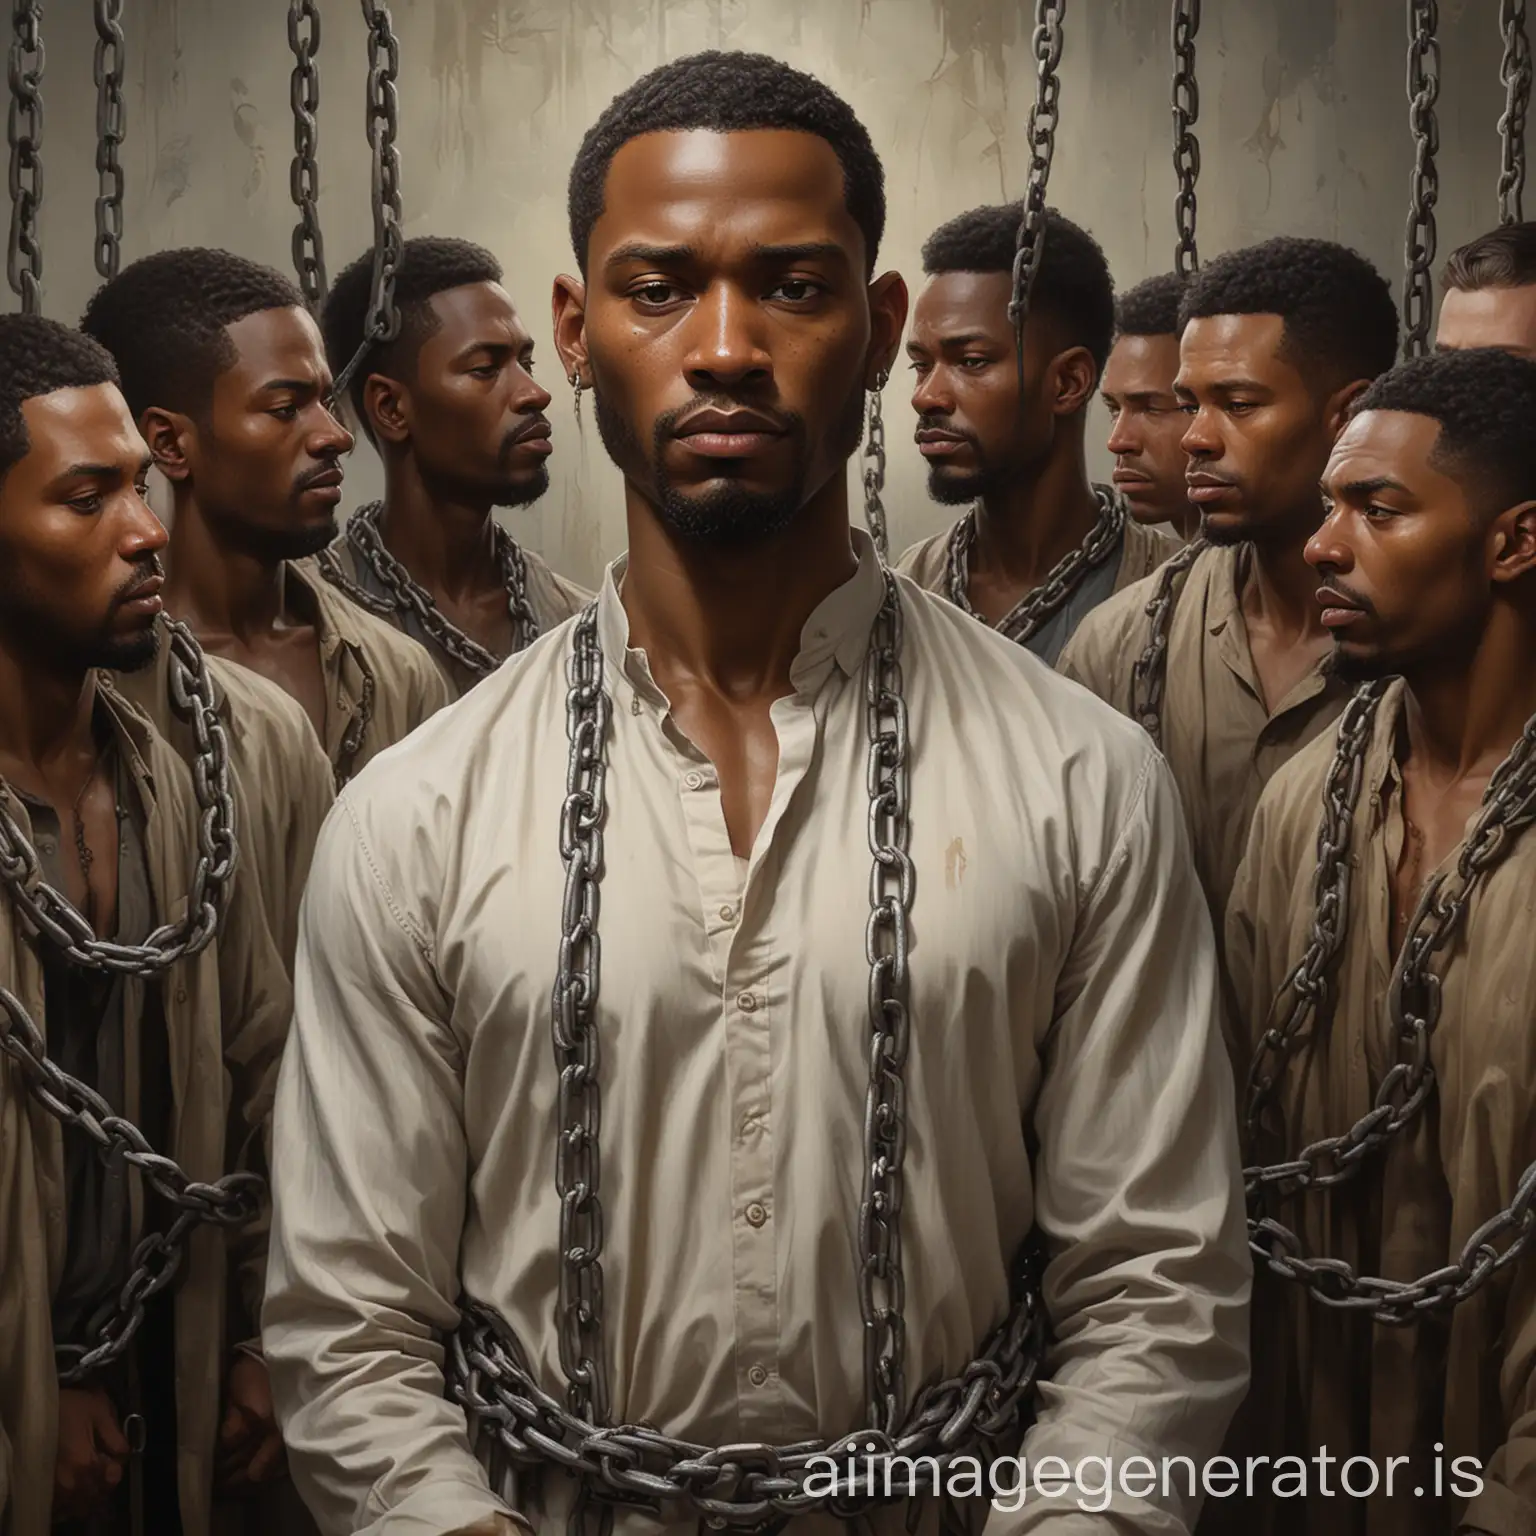 there is a man standing in front of a group of men, artwork of pedro bell, a portrait of the character, painting by android jones, rob rey, stefan koidl inspired, dramatic artwork, the the man is wrapped in chains, inspired by Kadir Nelson, fan art, by Jason Benjamin, slave, by Galen Dara, featured art, background artwork